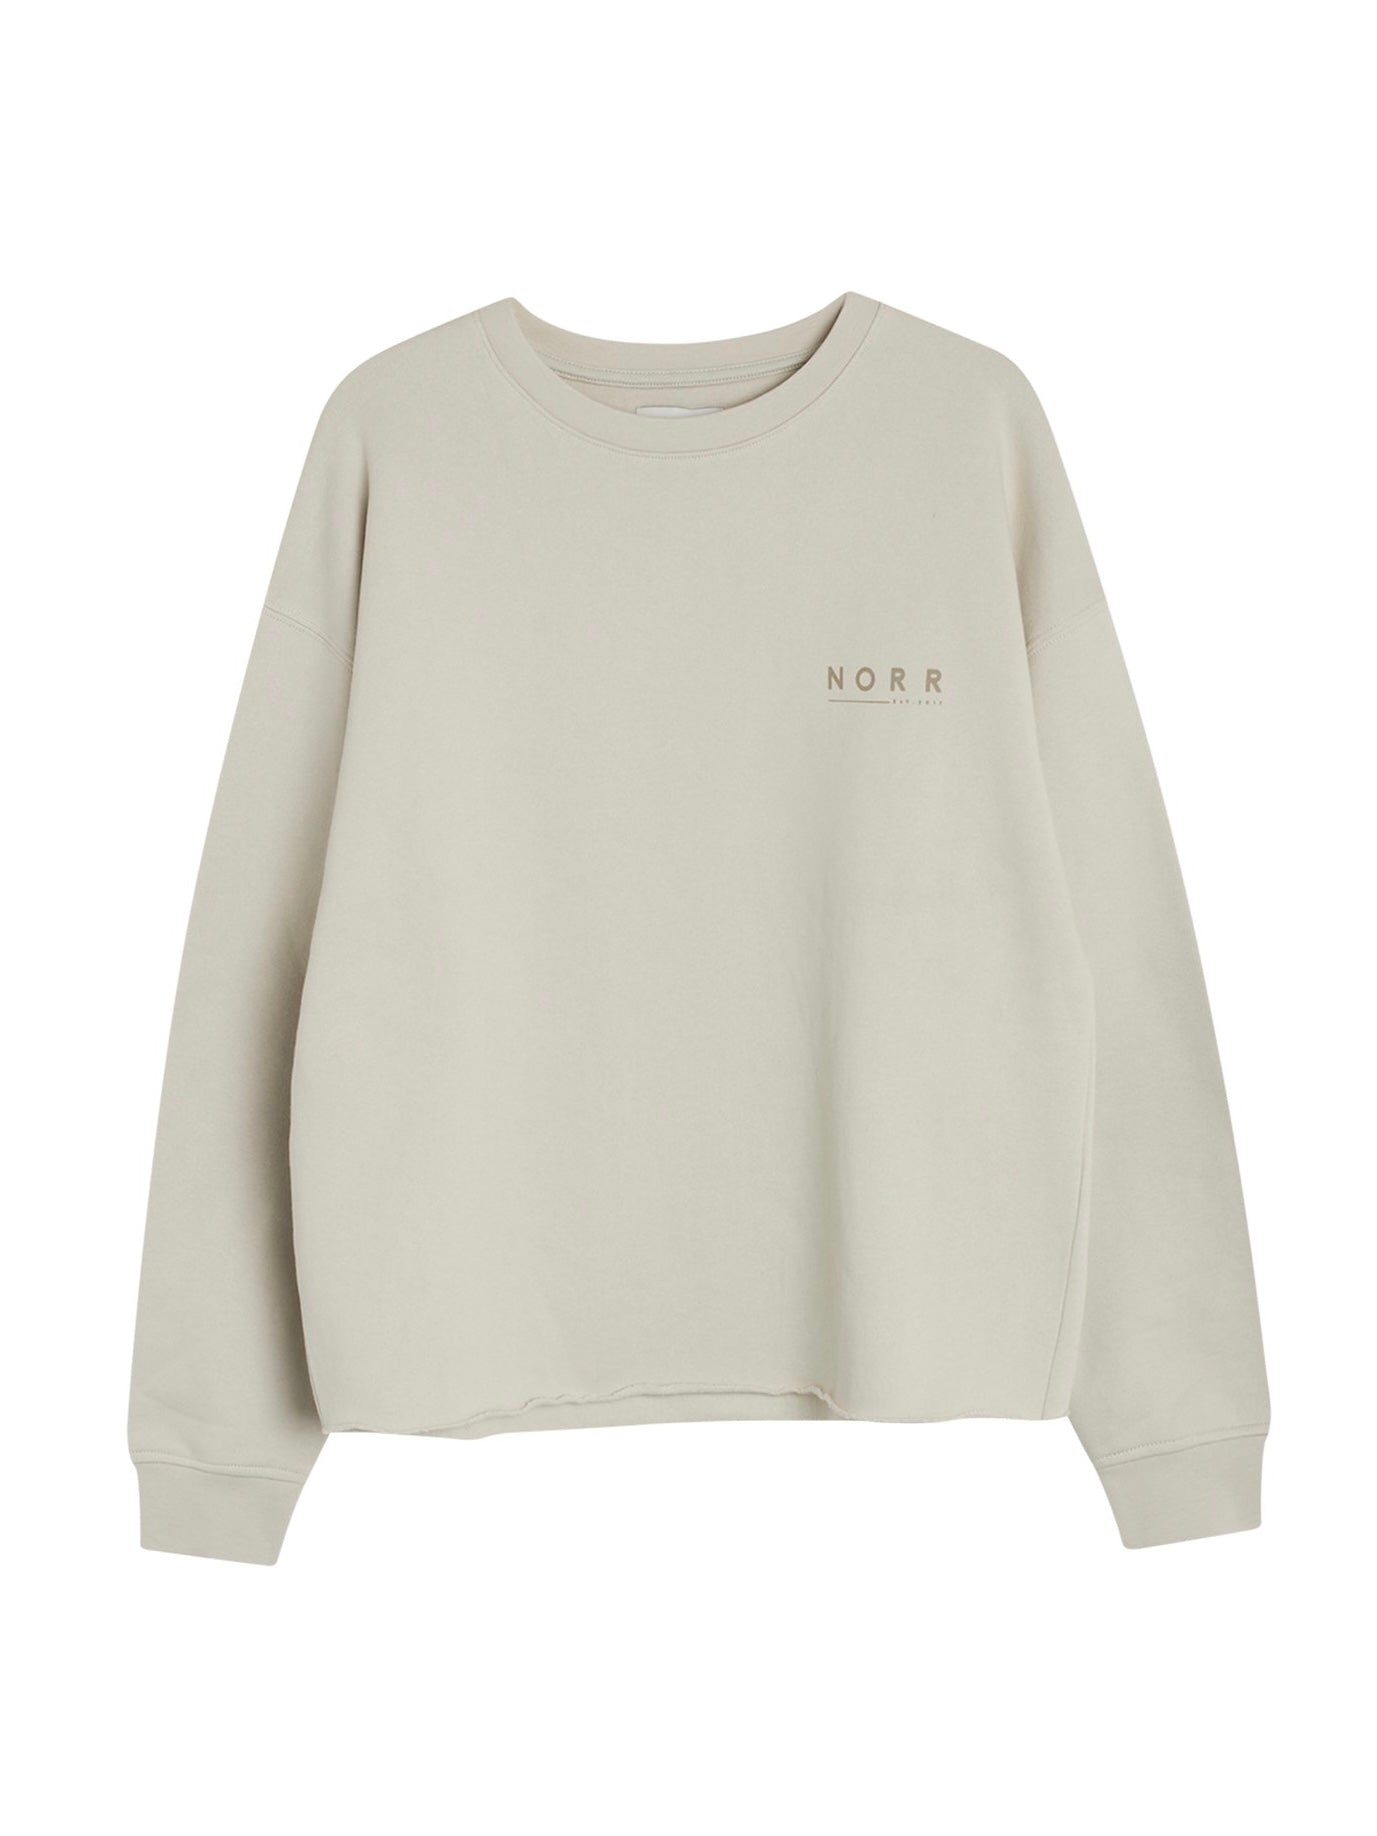 NORR Daisy sweat top is an oversized and cosy sweat with a raw hem and logo print detail. Made in organic cotton with a brushed finish inside. Organic cotton